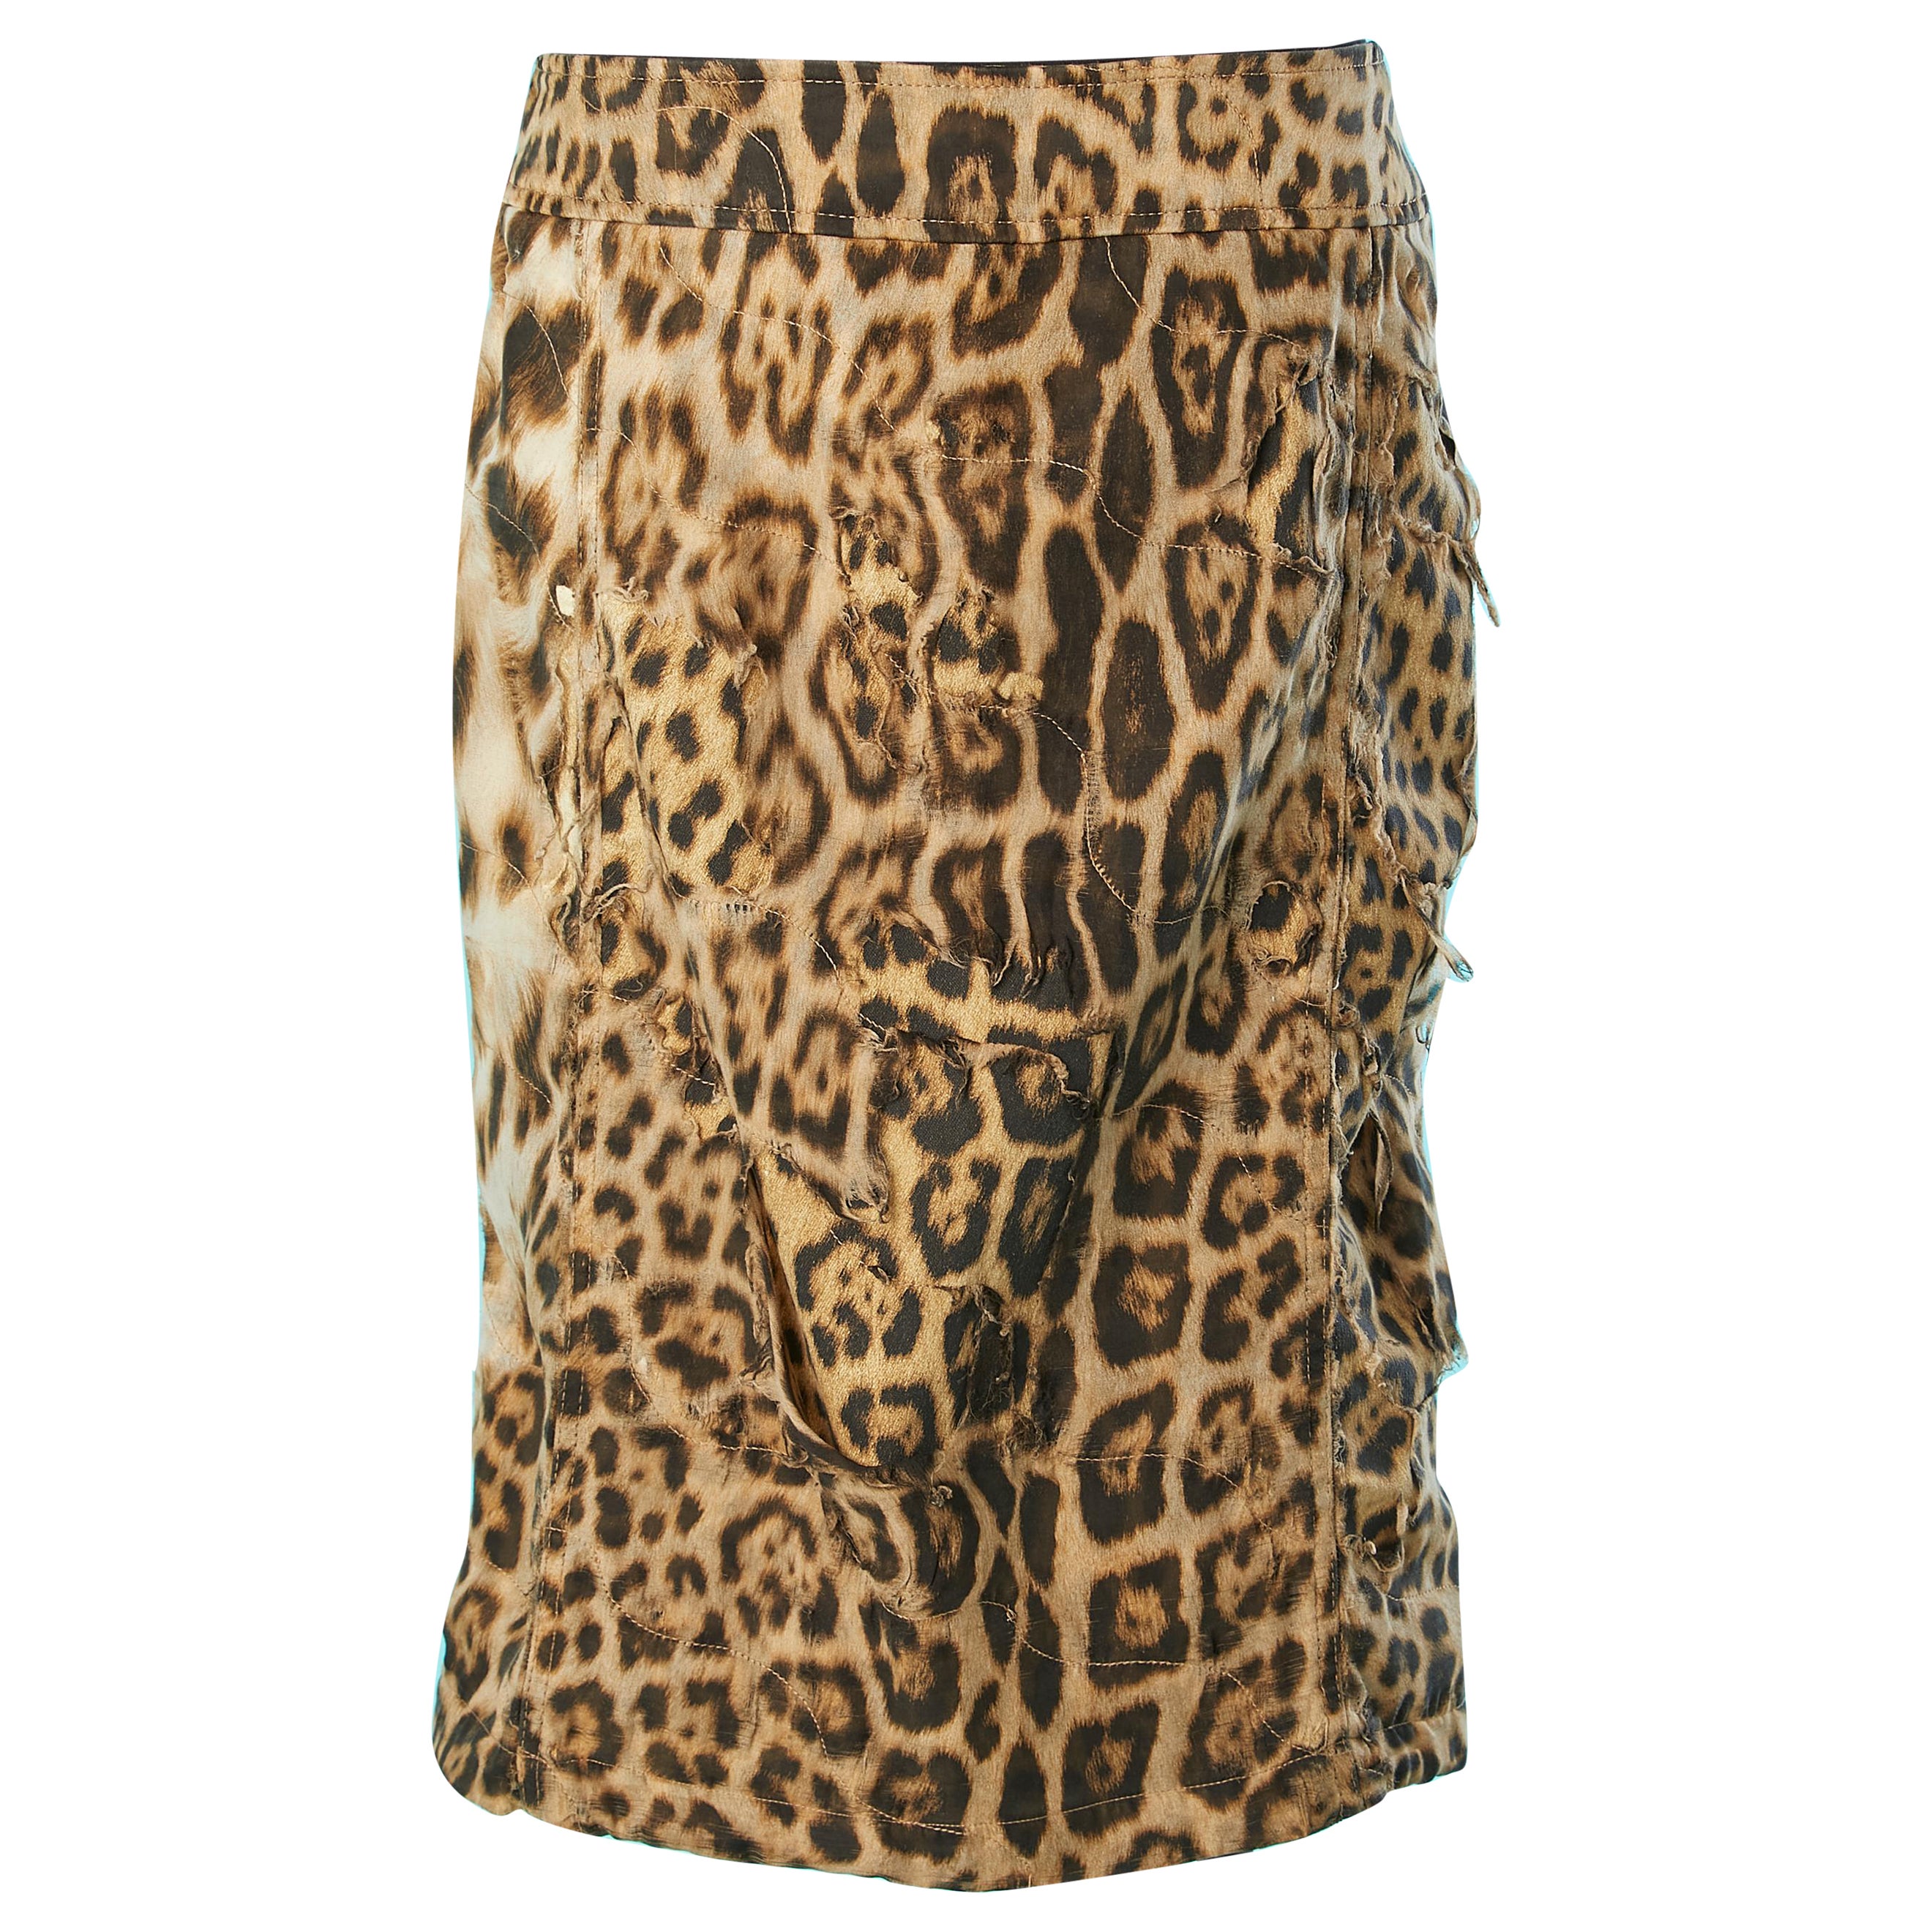 Leopard printed skirt with ripped- off silk chiffon over-lays Roberto Cavalli 